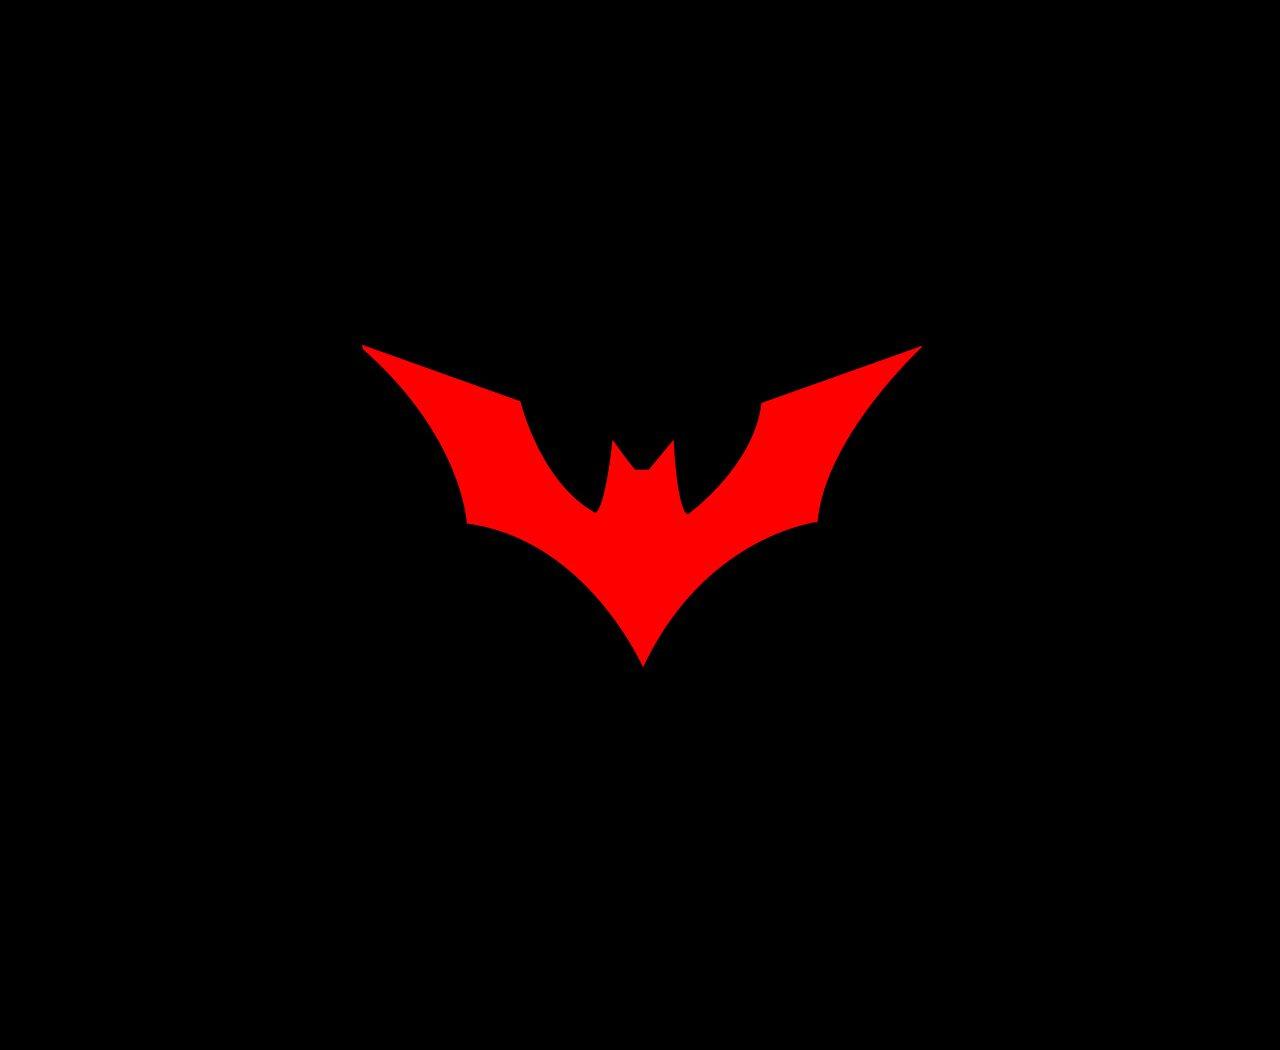 Cool Black and Red Logo - Cool Minimalist Batman Logo Wallpaper In Black And Red